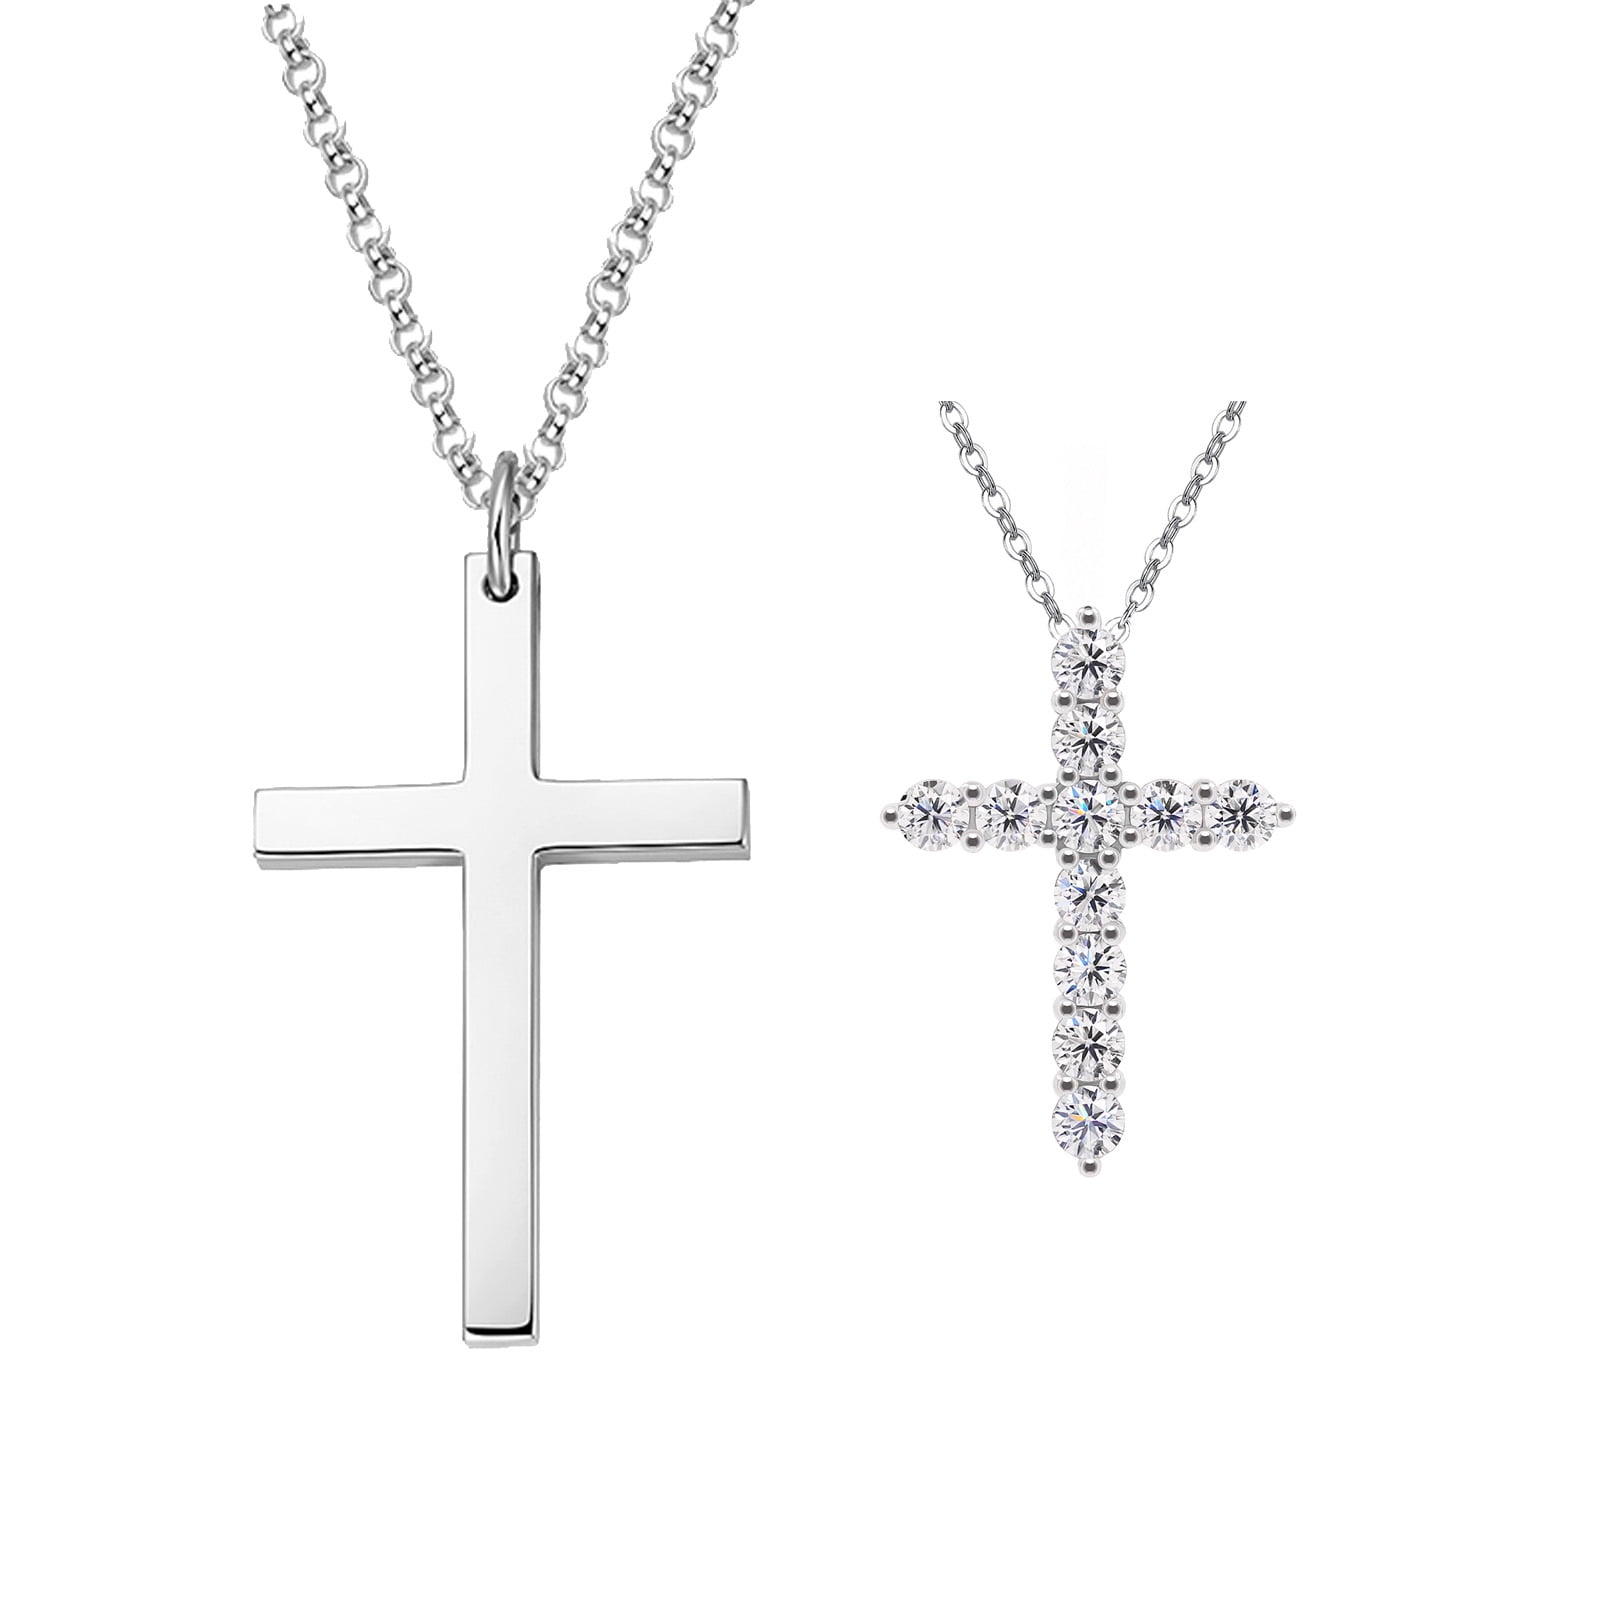 Daddy & Me Classic Silver Cross Necklace Set - Little Star Jewellery